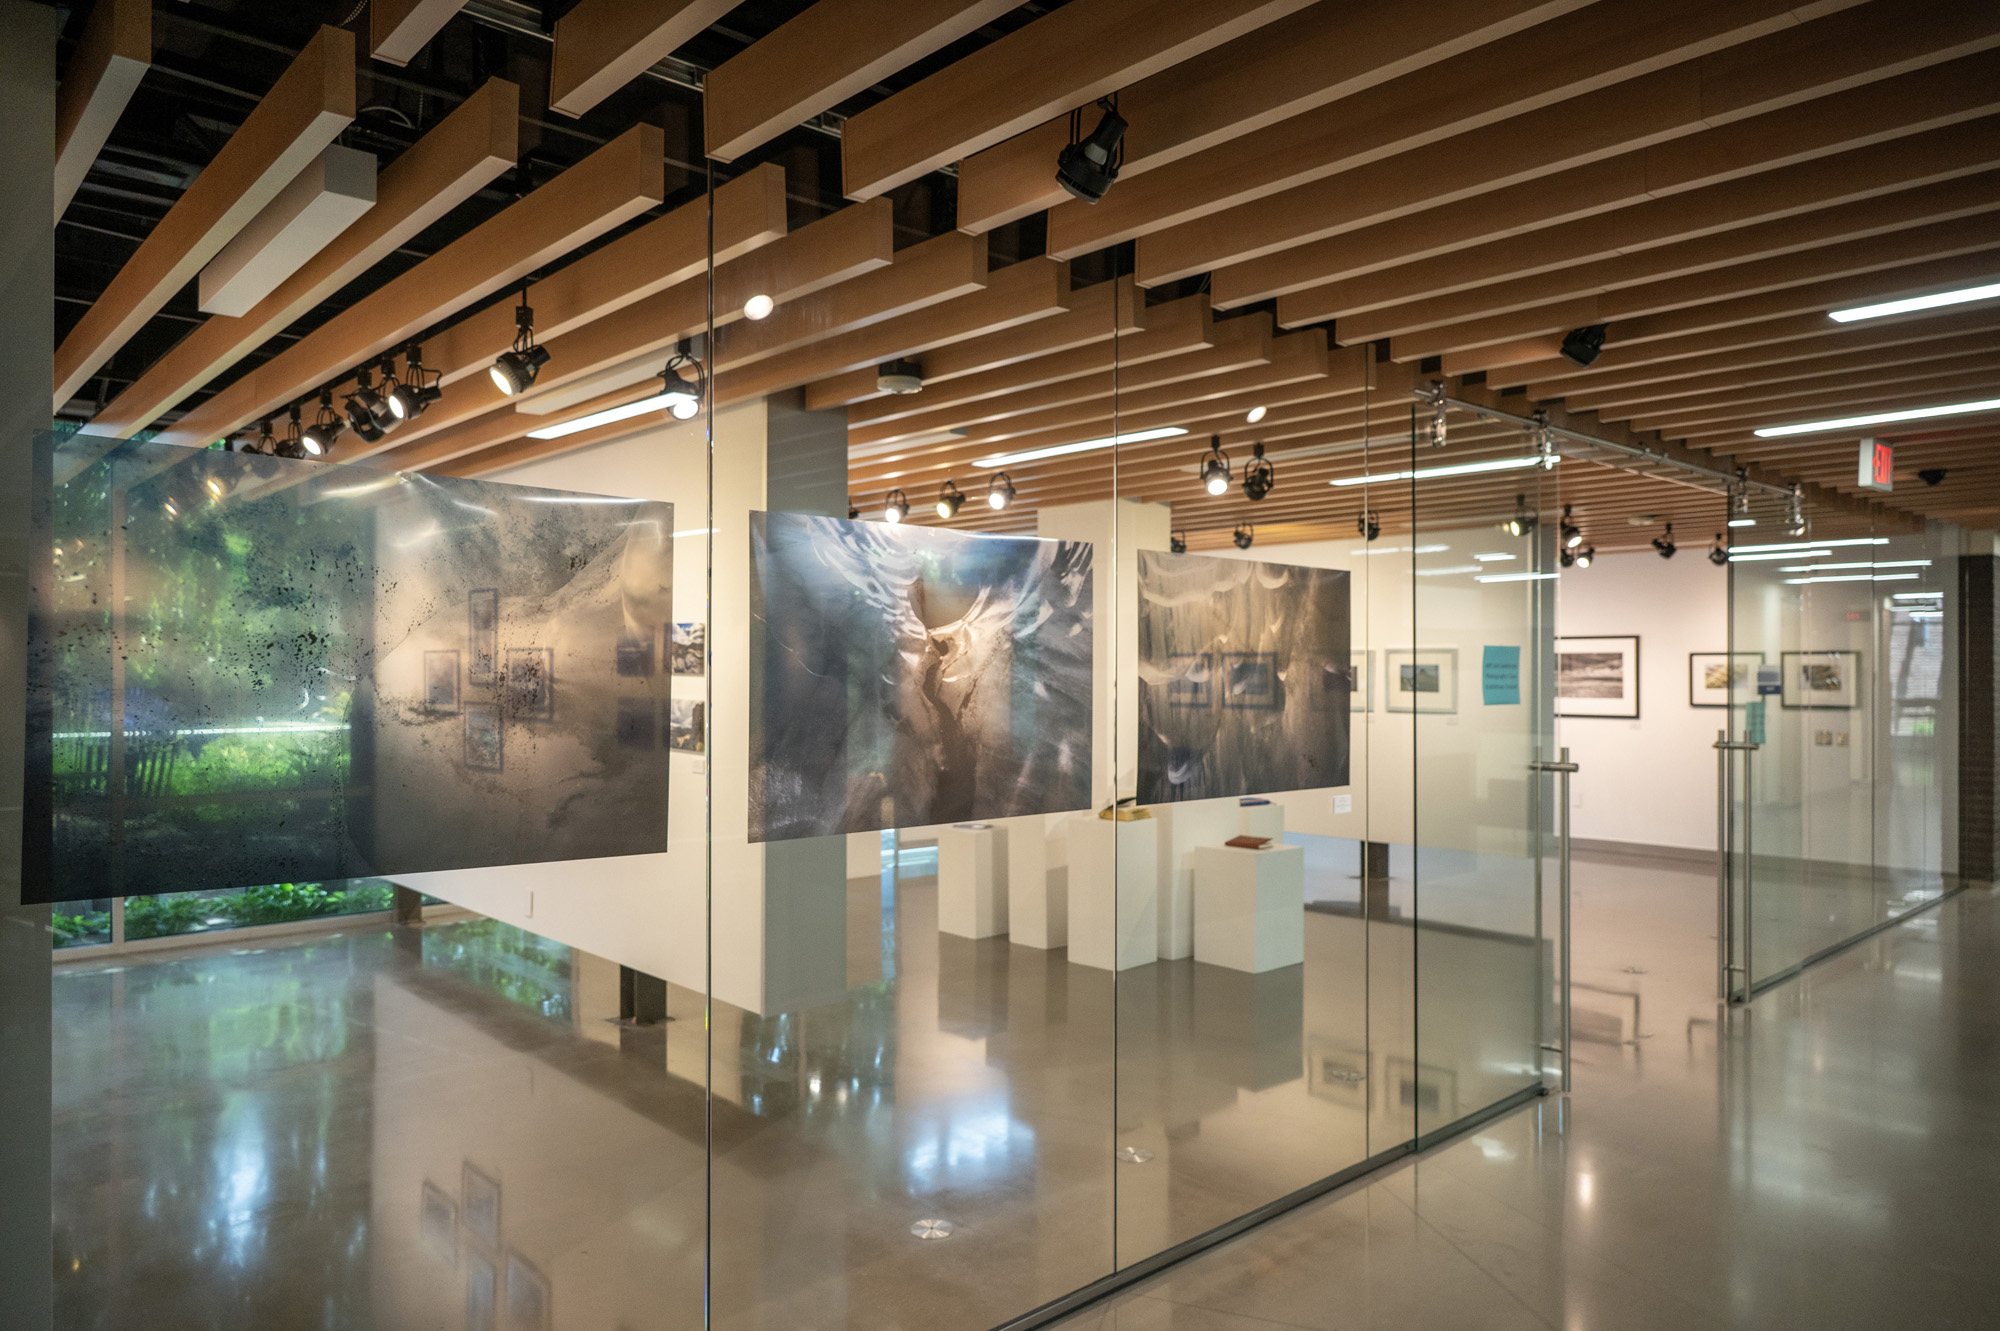 Photographs on display in a gallery.